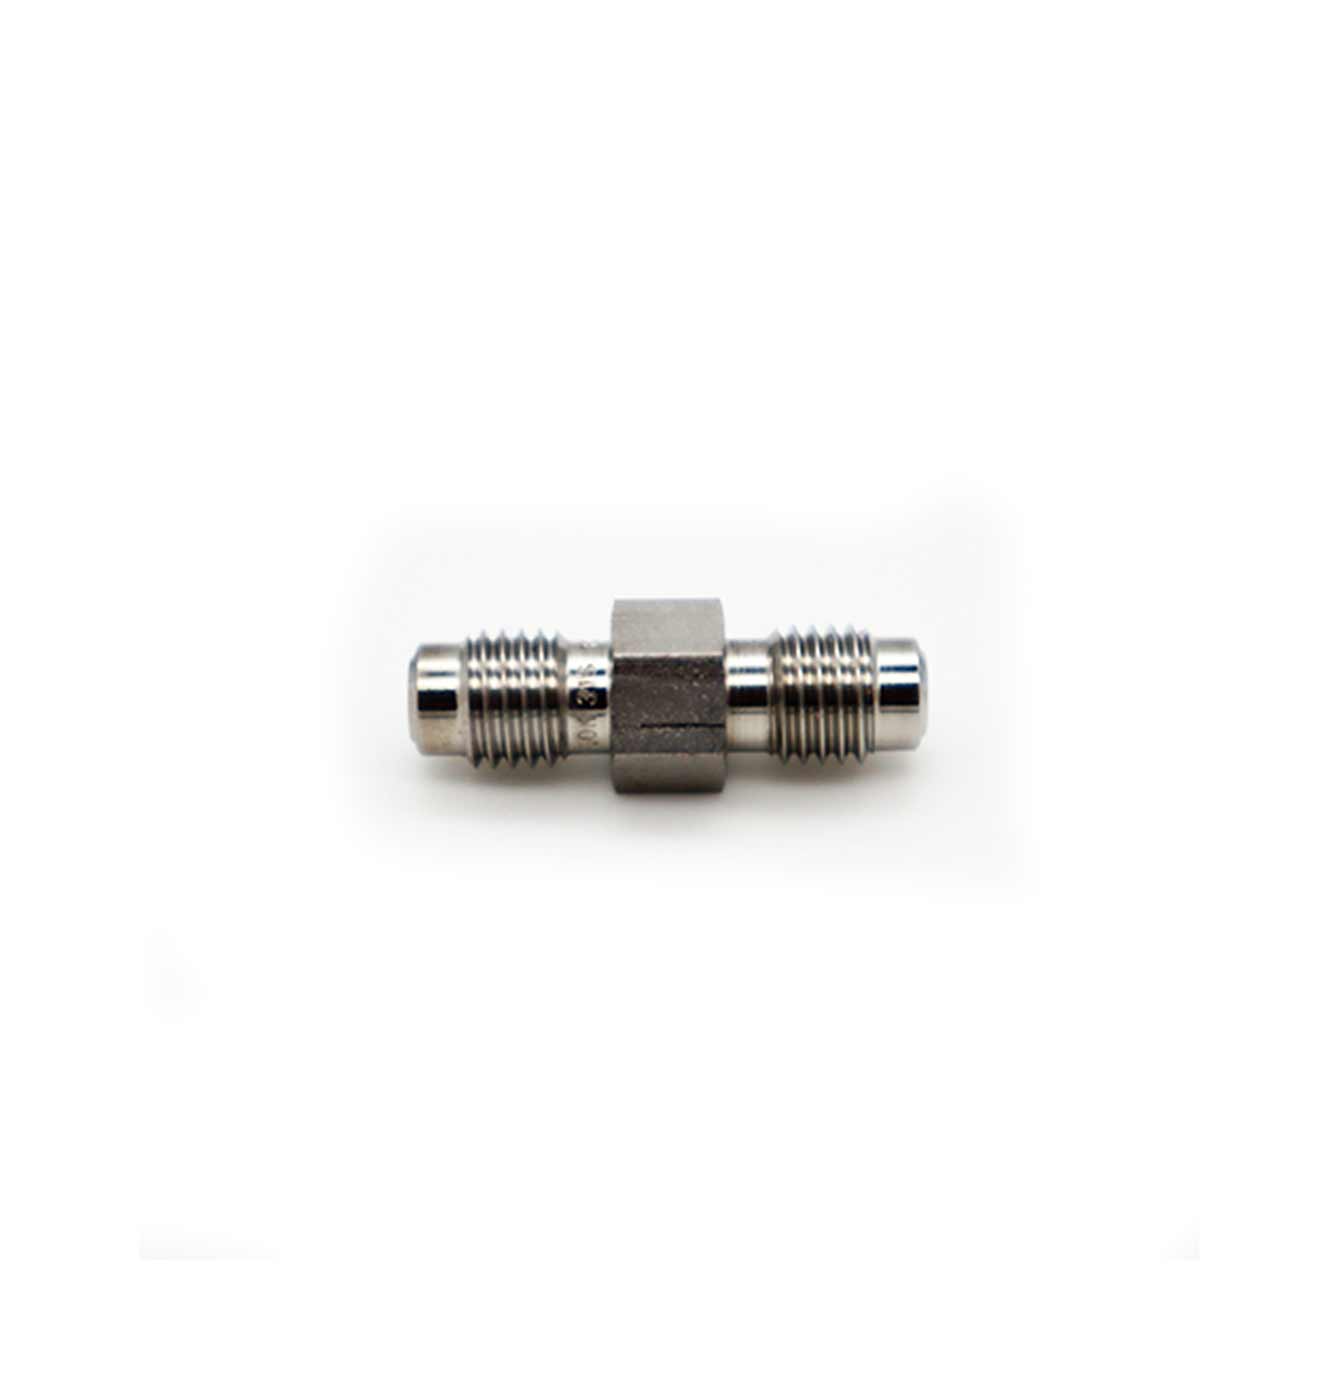 Sintered Impedance product photo